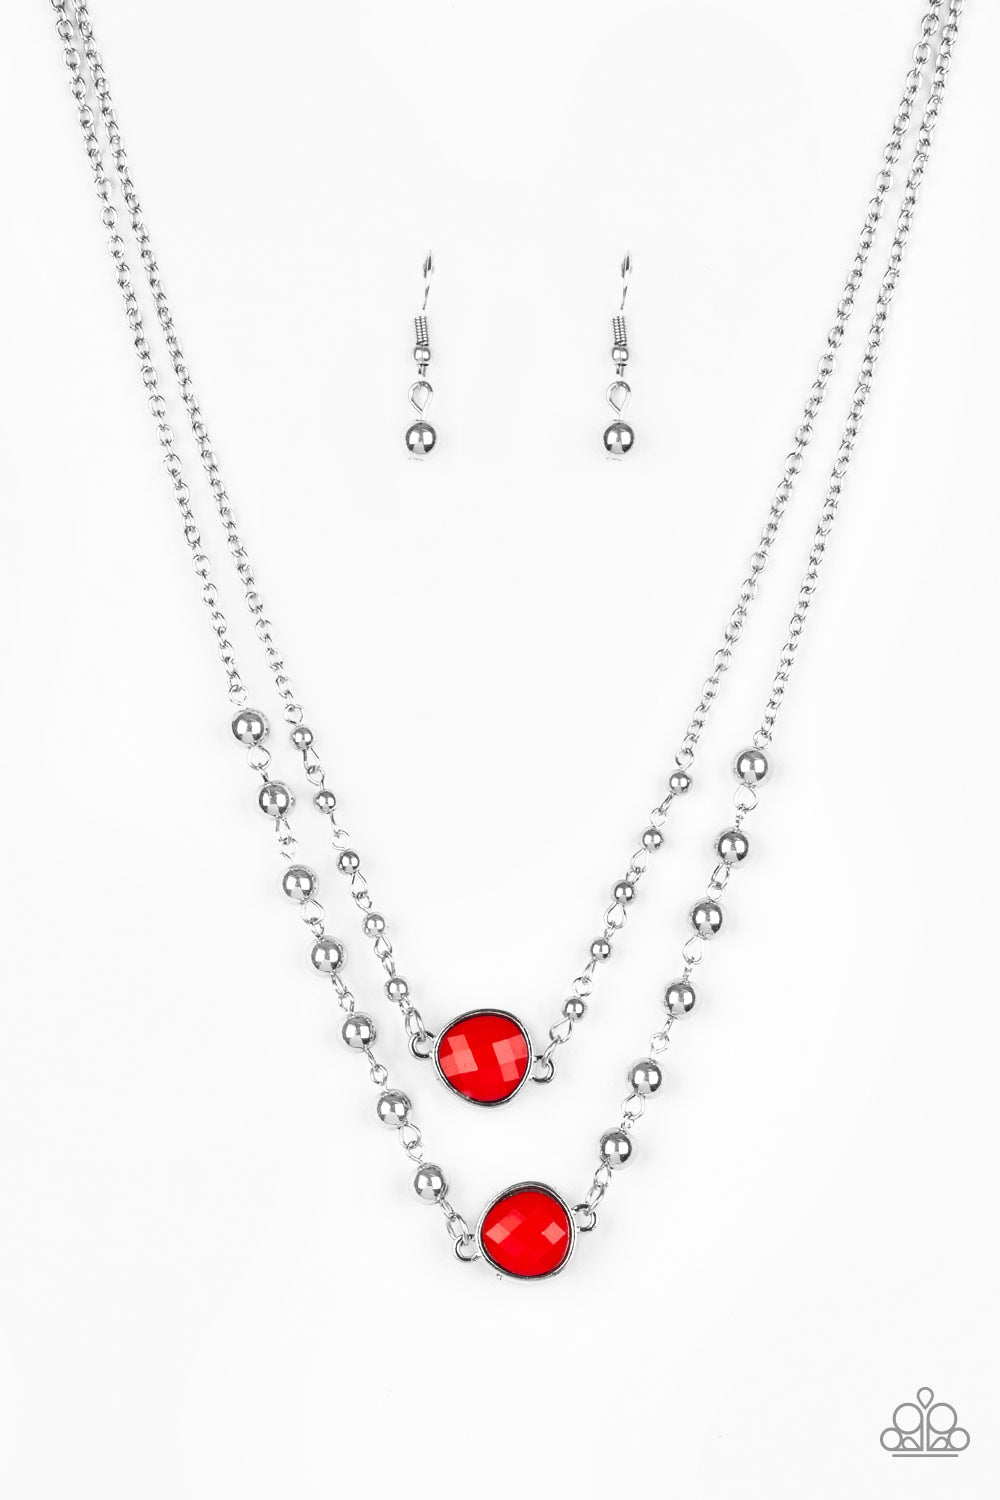 Paparazzi Necklaces - Colorfully Charming - Red